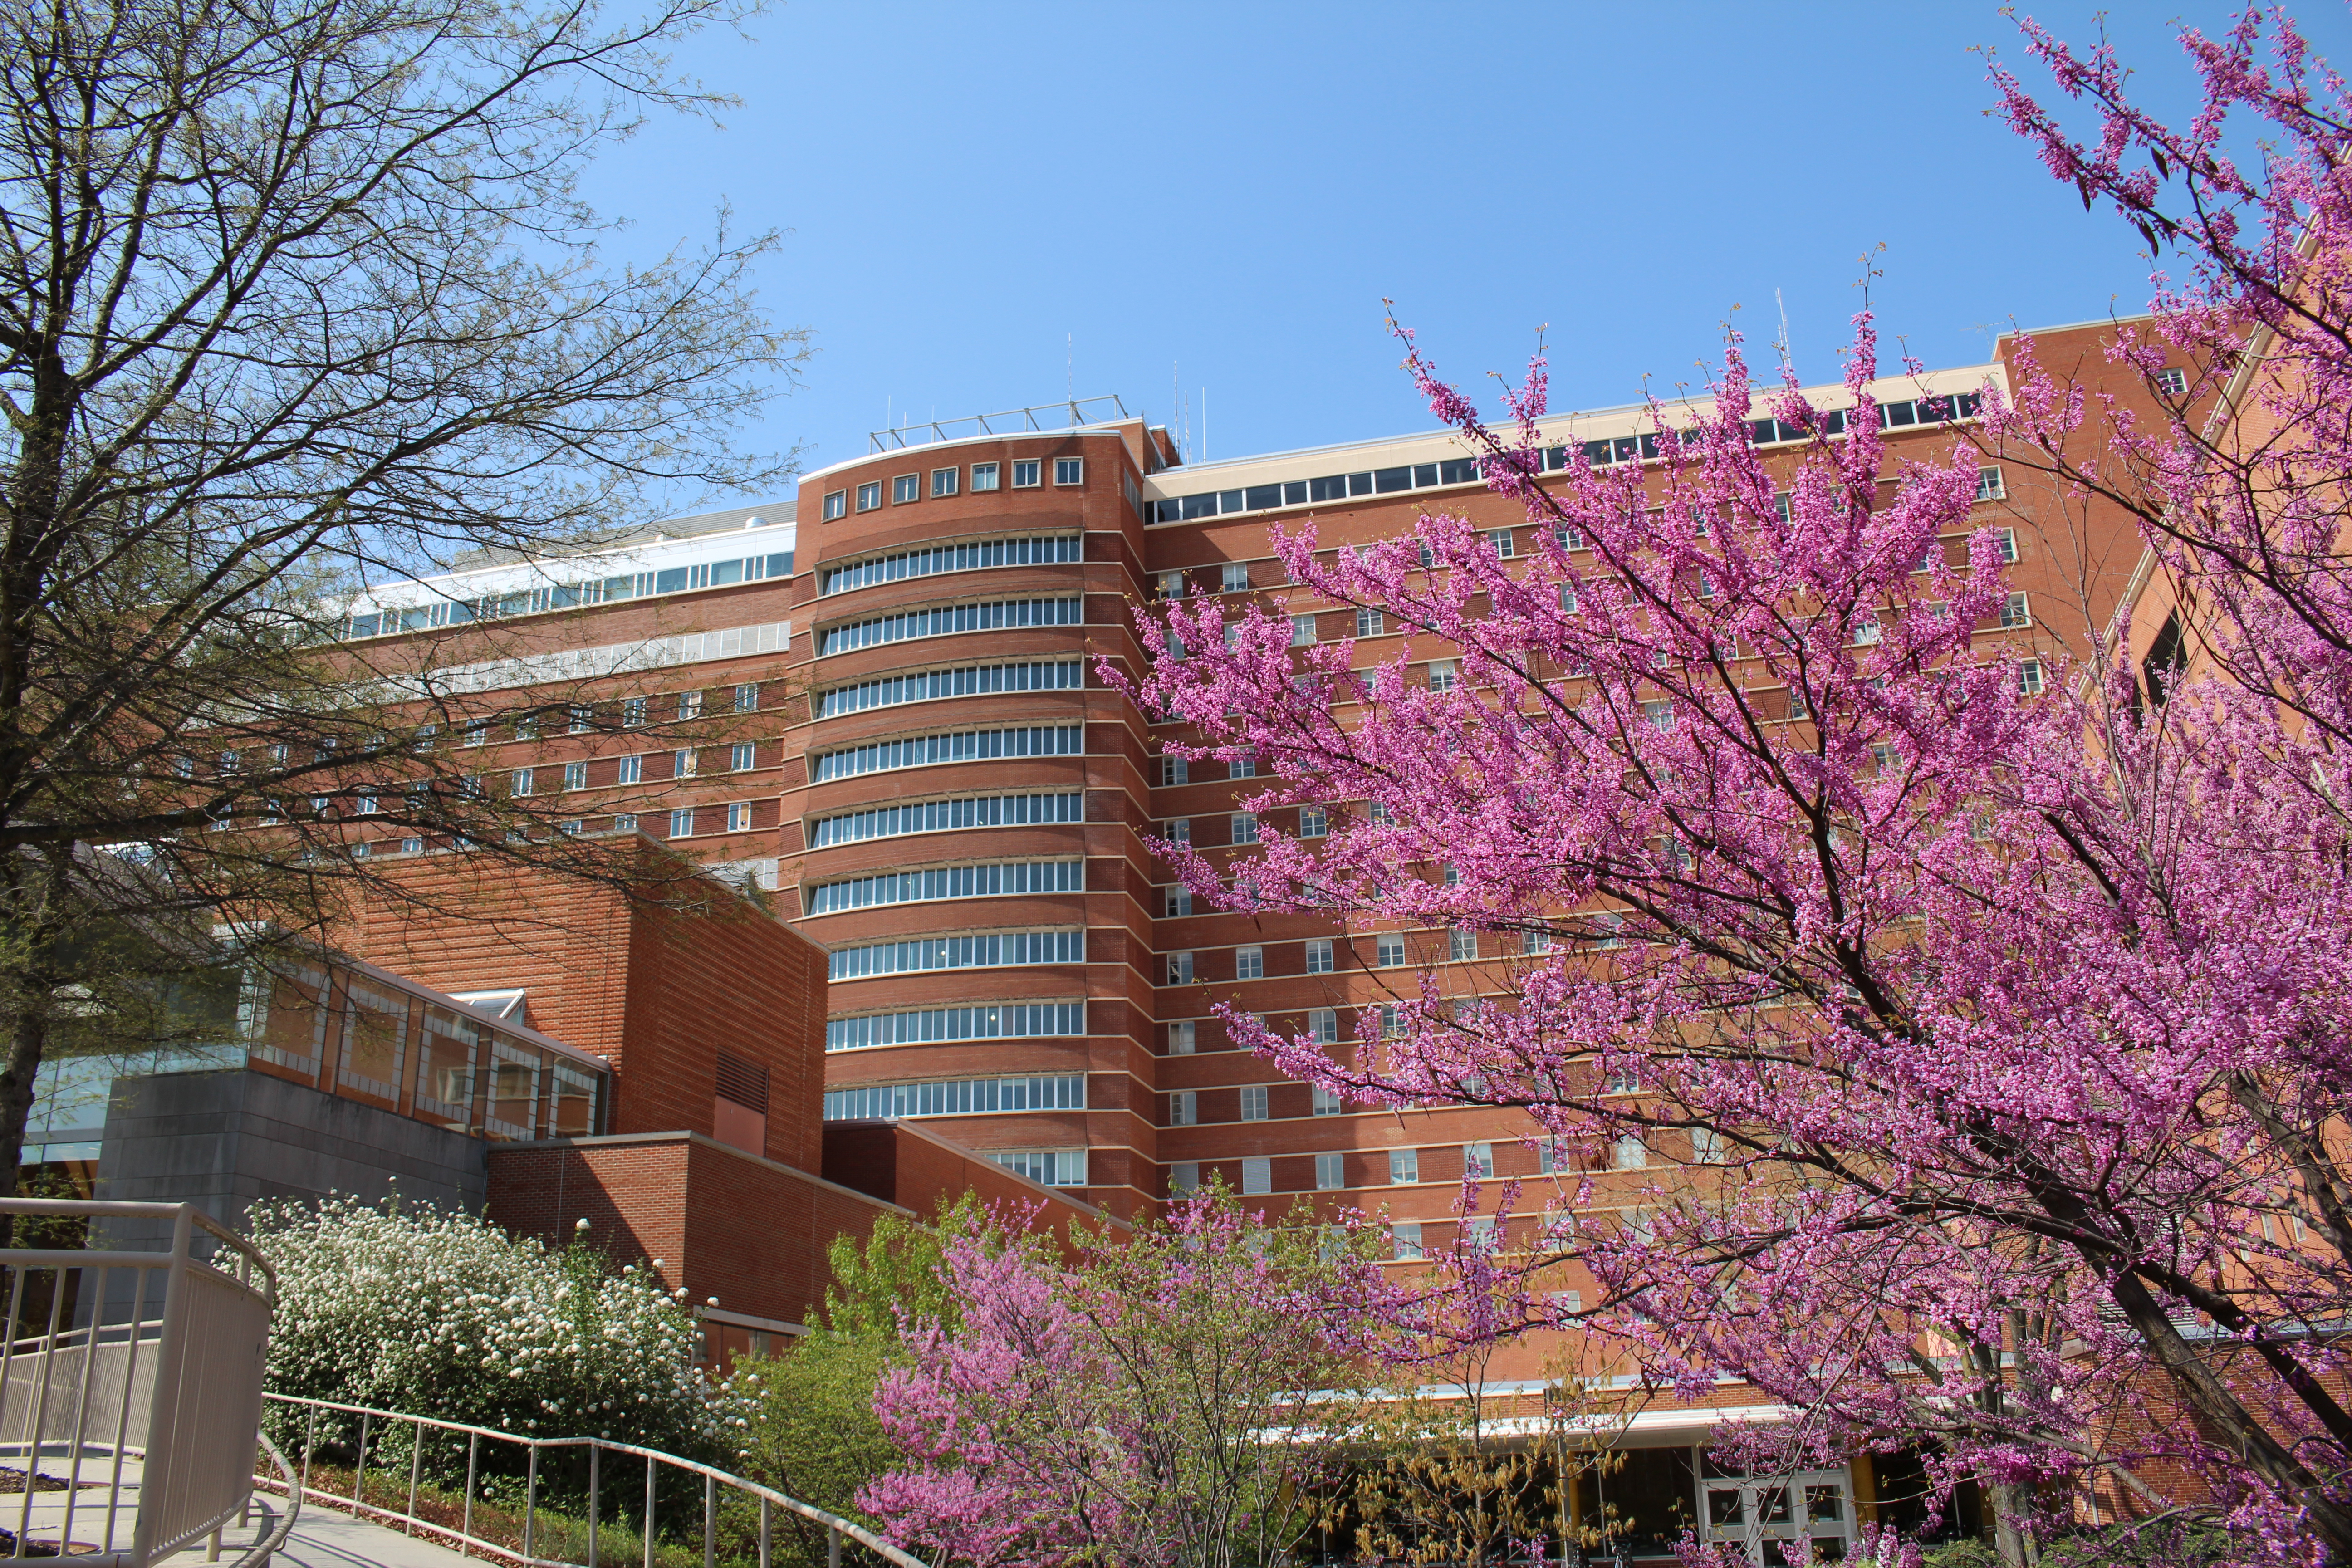 the south entrance of the NIH Clinical Center